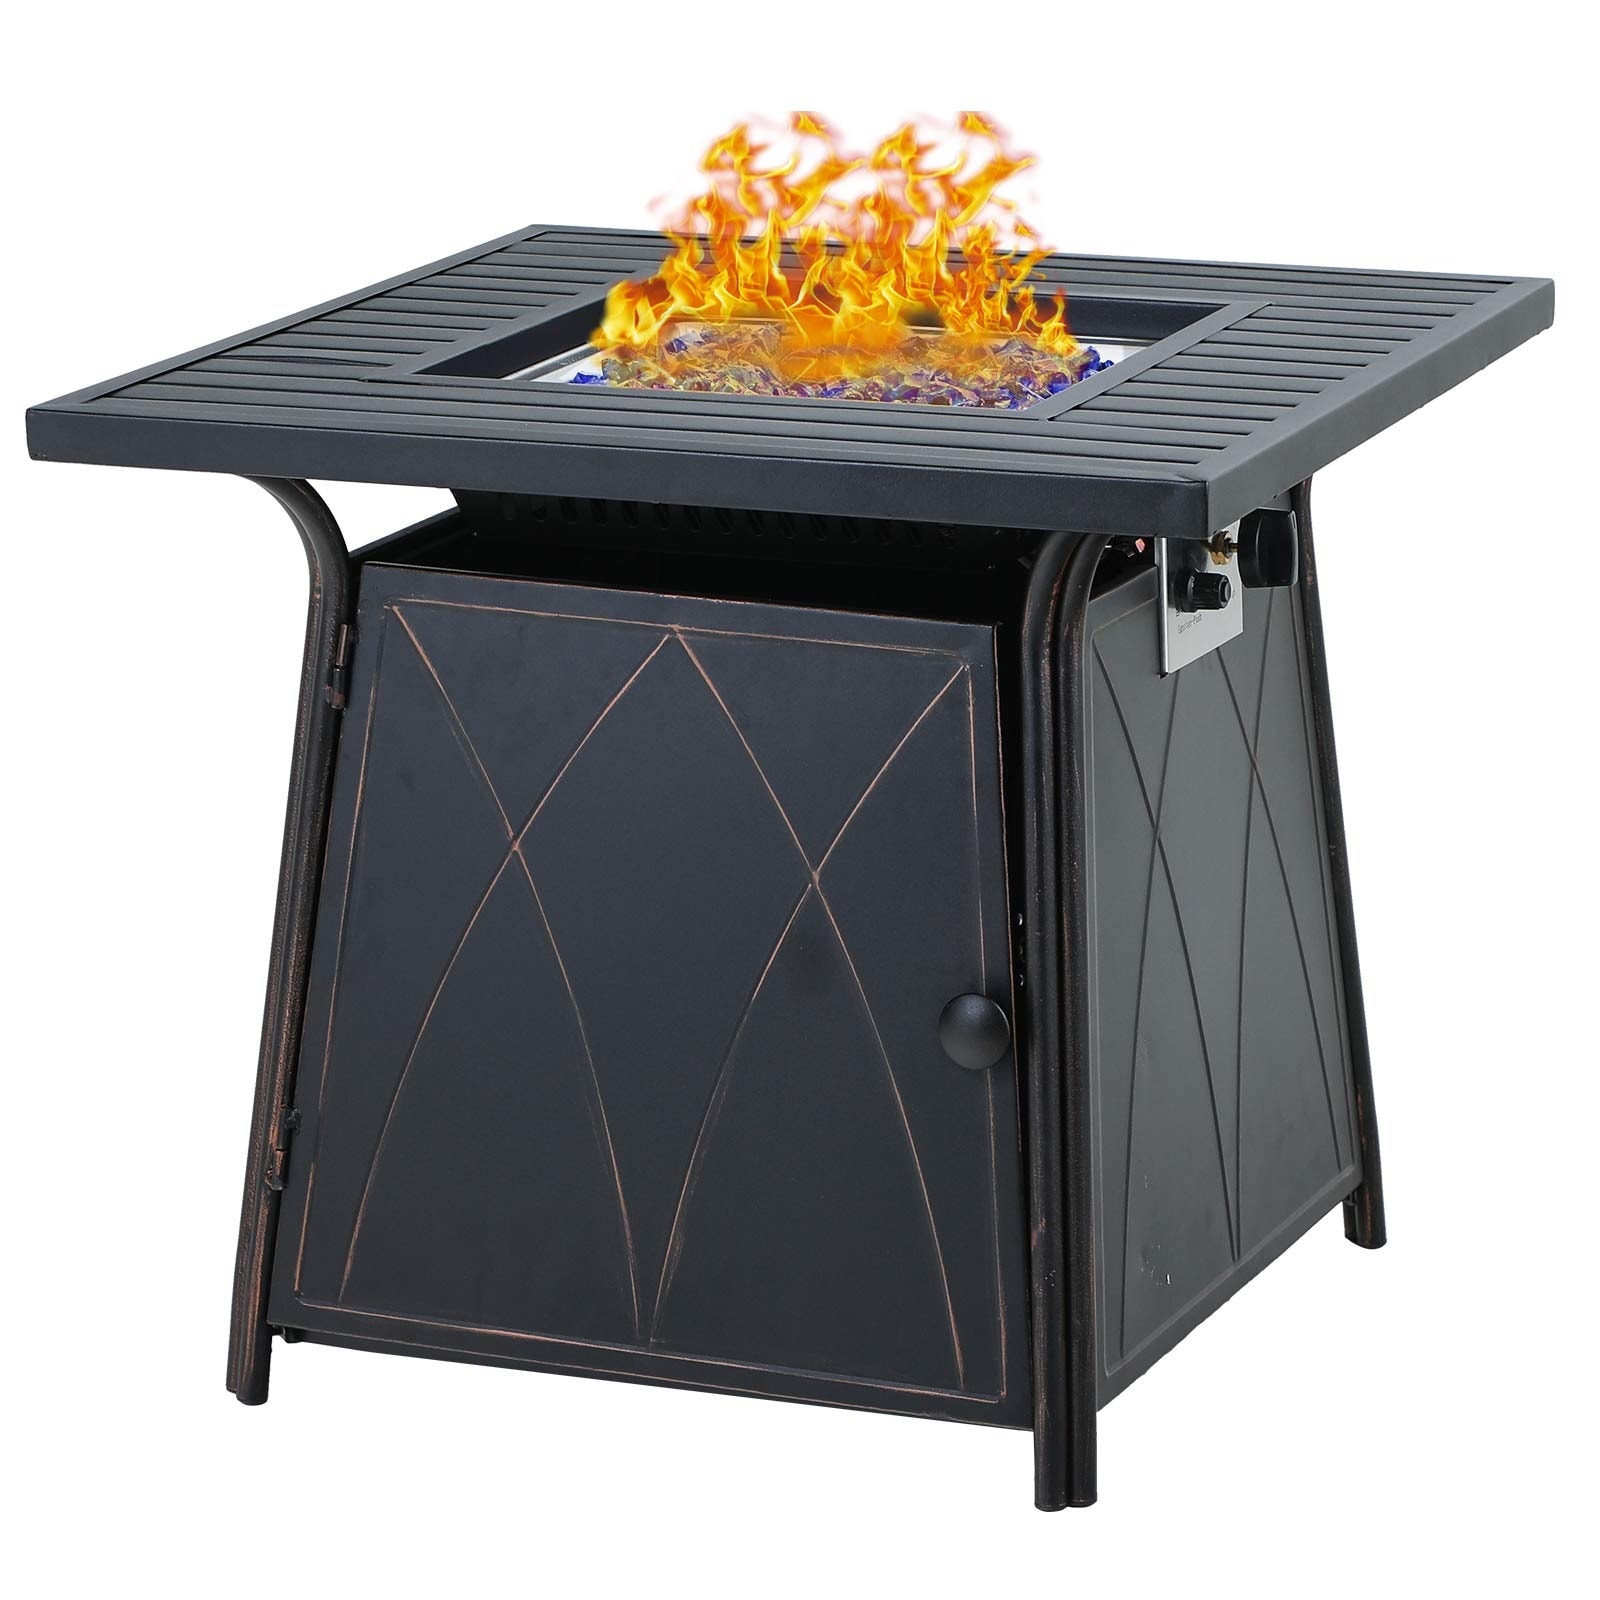 BALI OUTDOORS Gas Fire Pit Patio Furniture Table Propane Firepit 50,000BTU Blue Glass Stone Black 28Inch Steel Tabletop Fire Pit with Cover Lid 